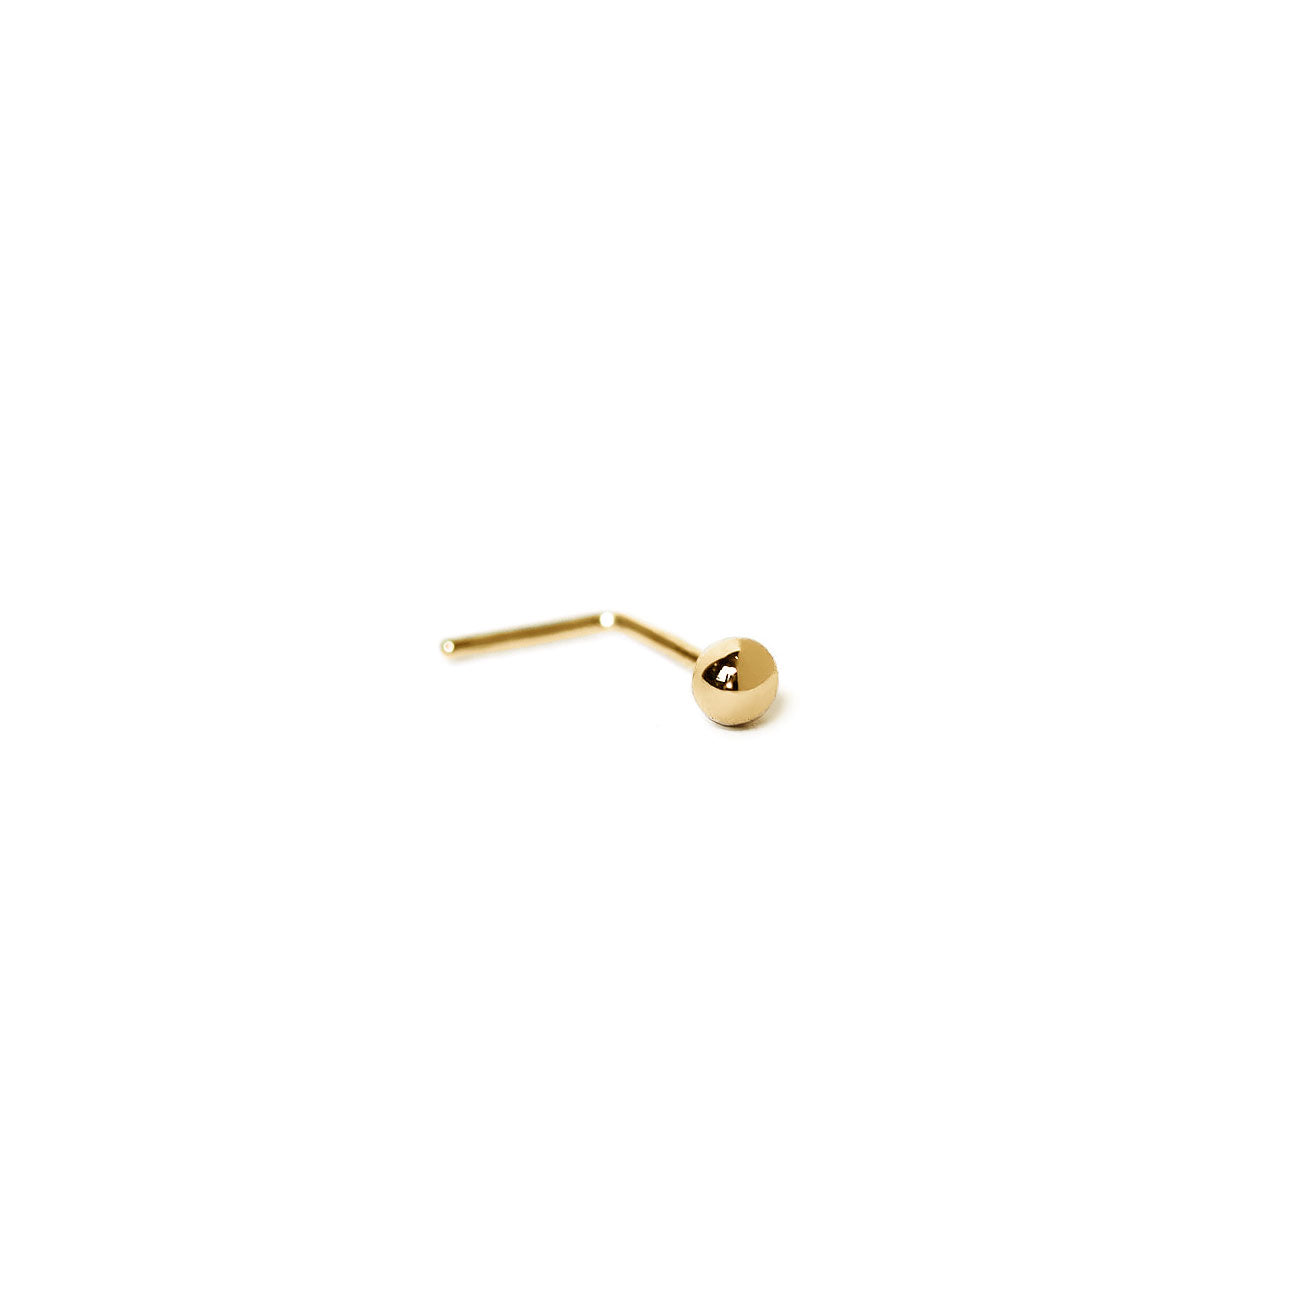 Buy Crown Dangling Nose Ring, Nose Stud, Indian 14K Gold Plated Nose Ring,  Body Piercing Jewelry, Women's Gift Nose Ear Pin at Amazon.in